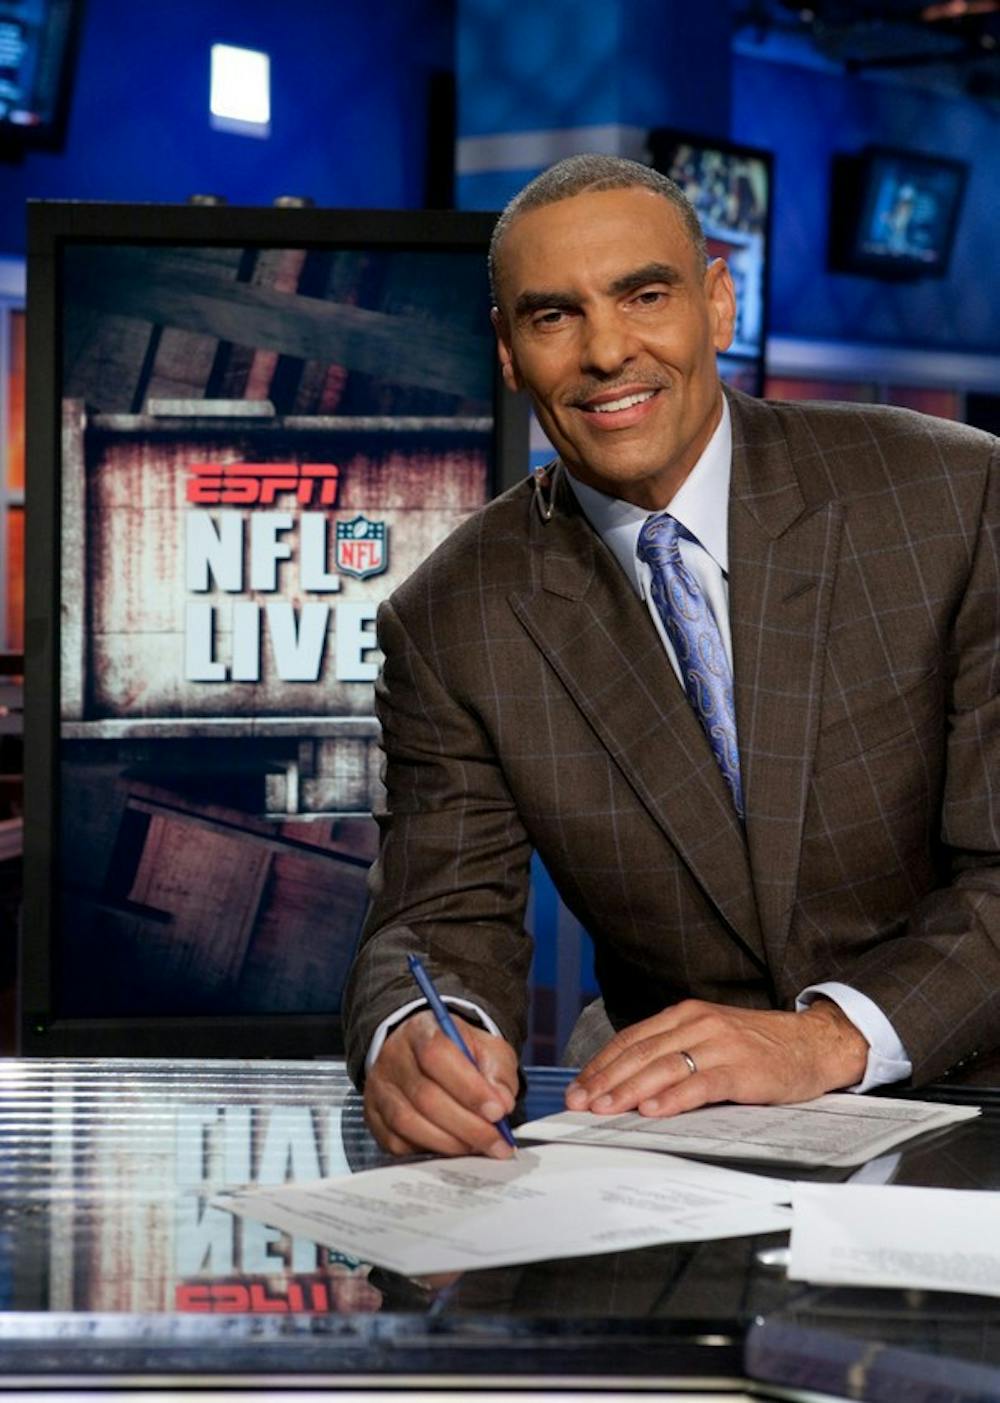 Herm Edwards coming to SU